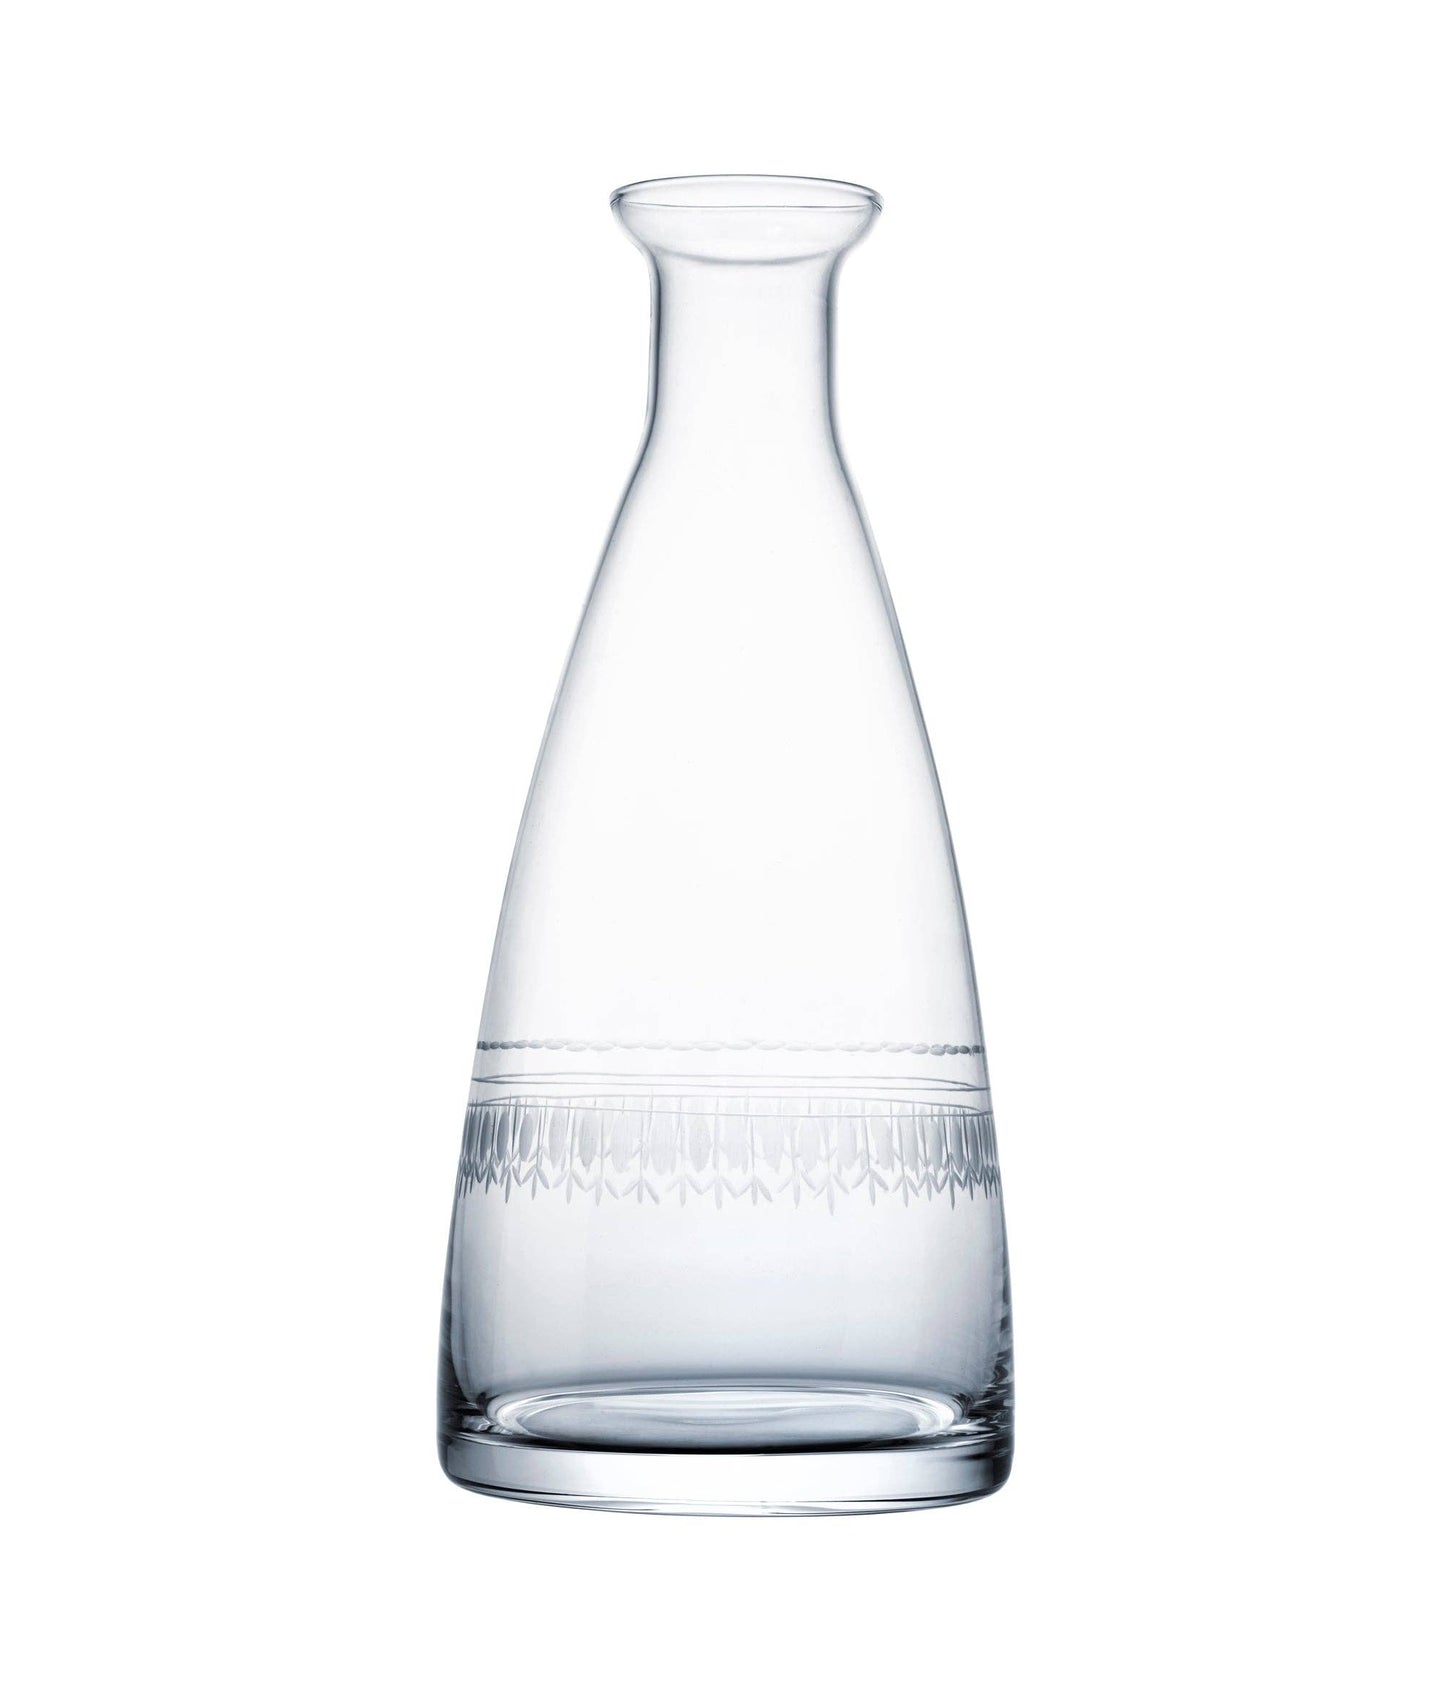 The Vintage List - A Crystal Table Carafe with Ovals Design